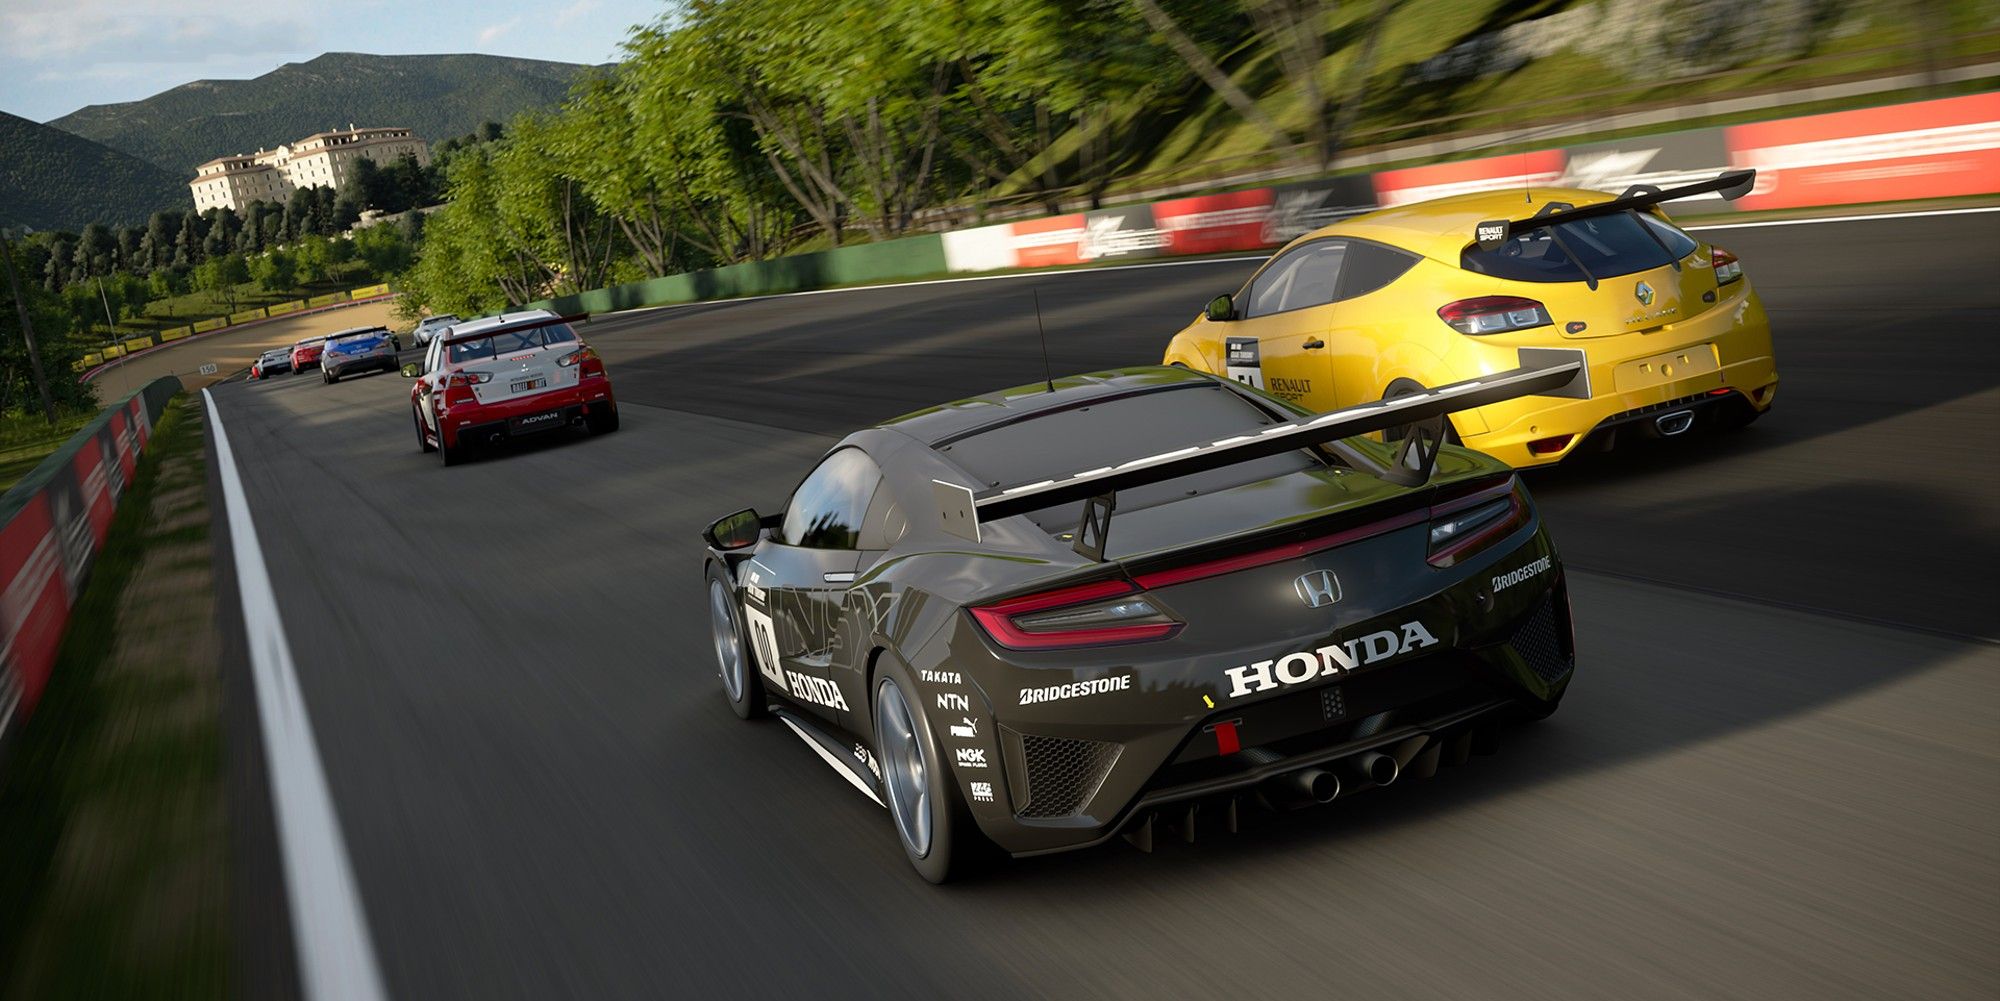 PlayStation quietly pulls Gran Turismo 7 from sale in Russia